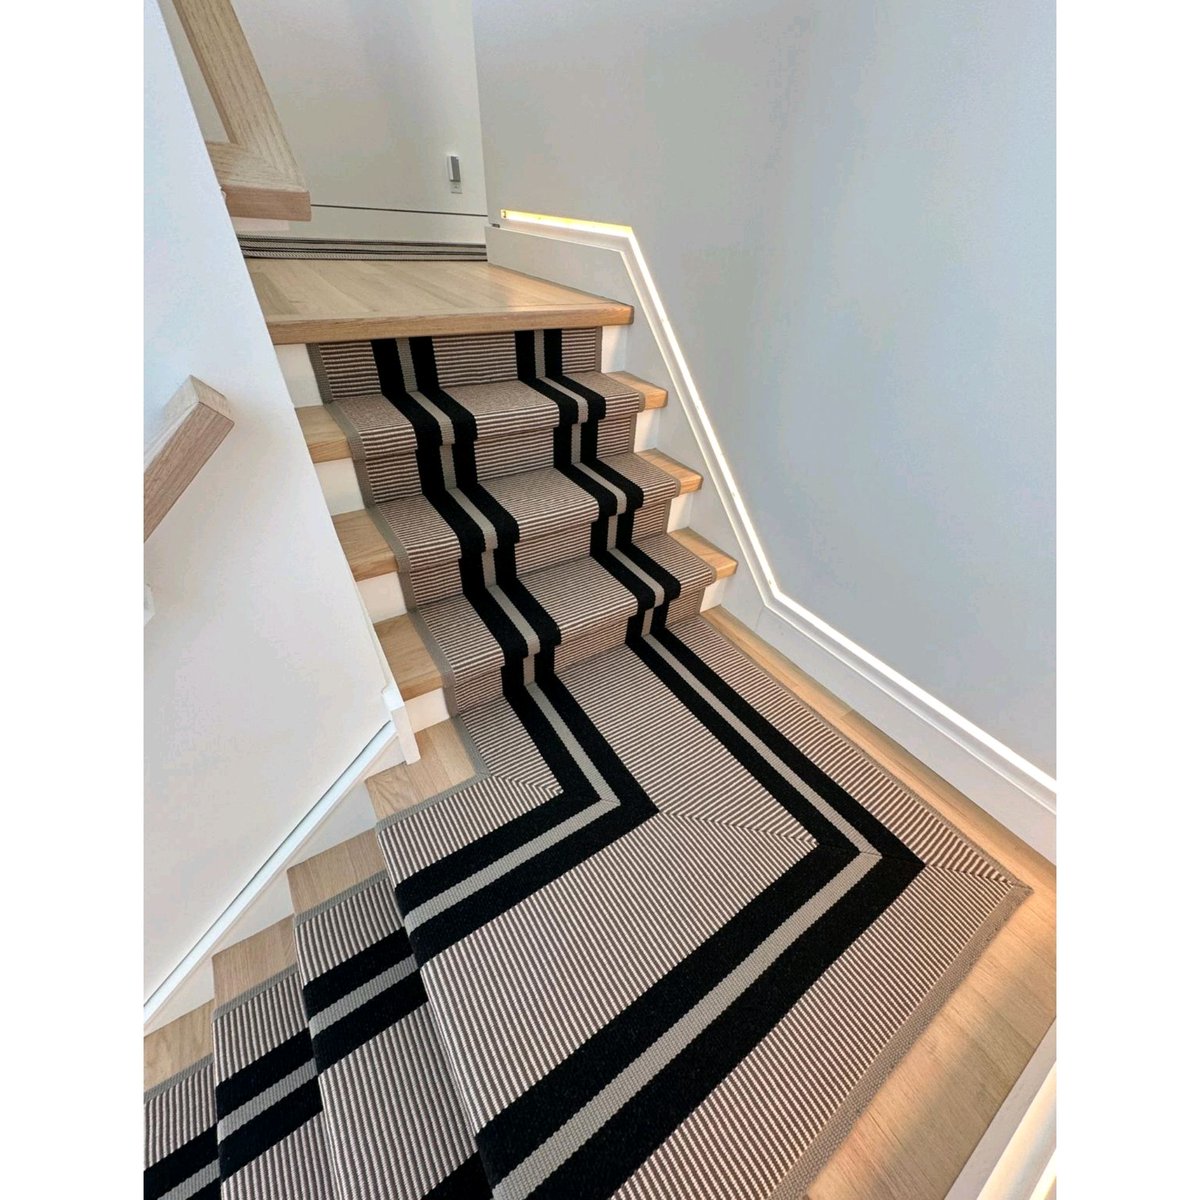 Our iconic PNT16 runner fits right in with the light colours and elegant finishes used in this superb hallway.
#hartleytissier #hartleyandtissier #madeinengland #designedinfrance #flatweave #wool #carpet #stairrunner #interiordesign #staircase #flooring #woodenstairs #staircarpet